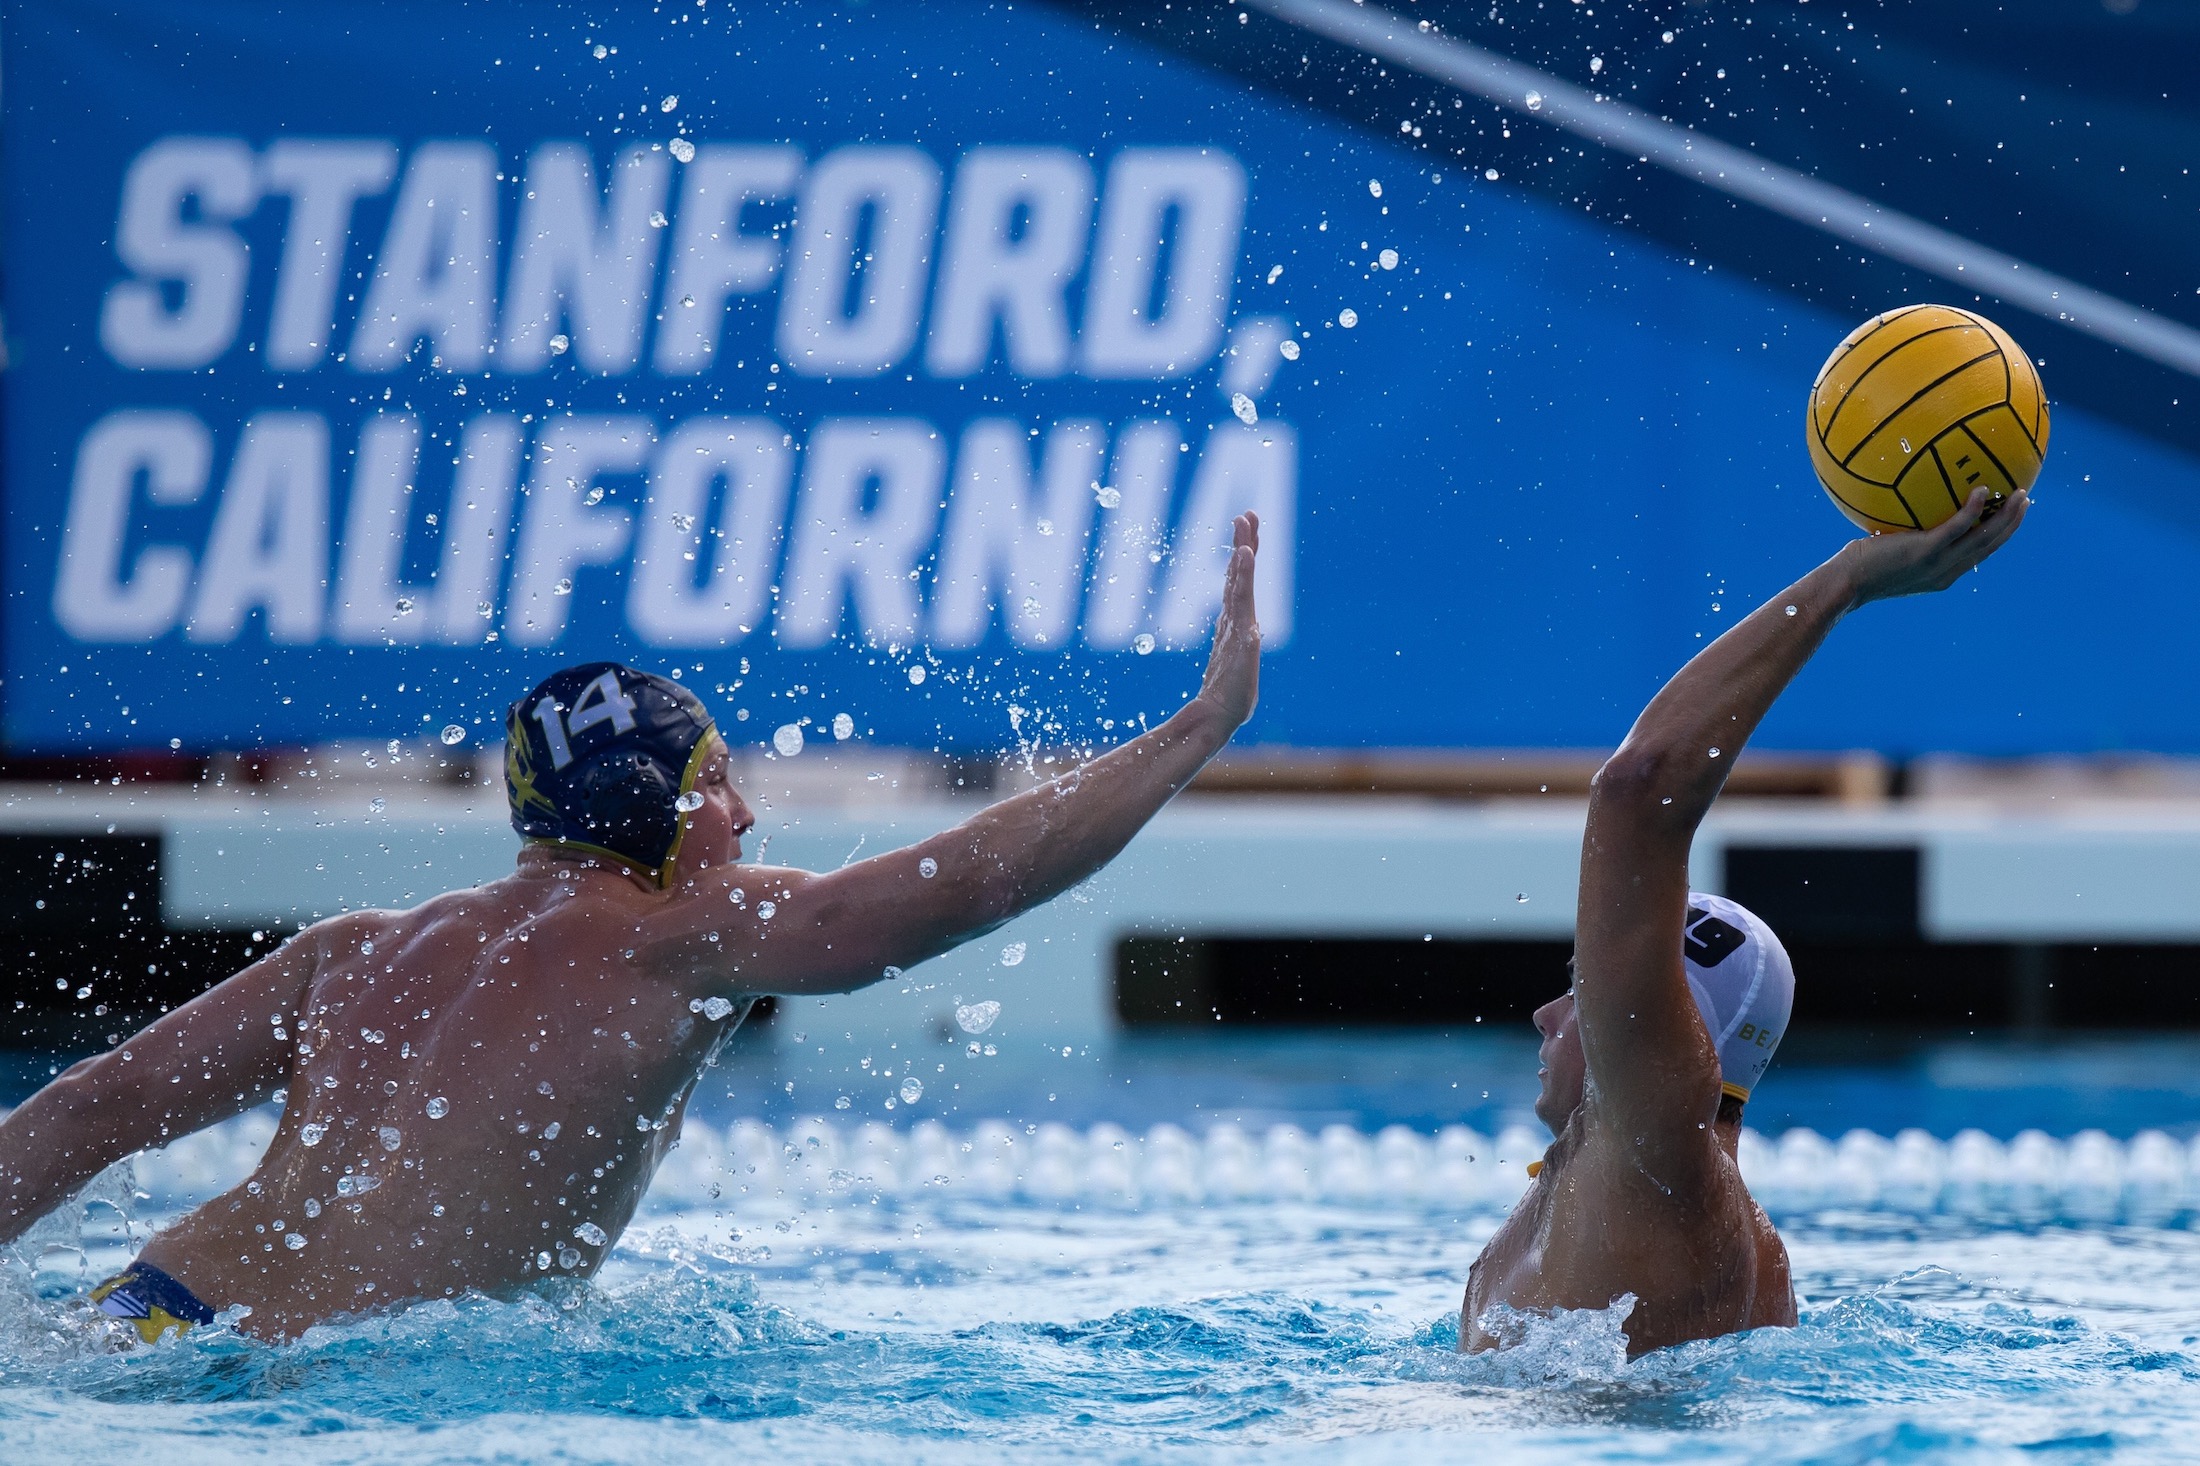 Wins by UC San Diego, UCLA Finalize the 2018 NCAA Men’s Water Polo